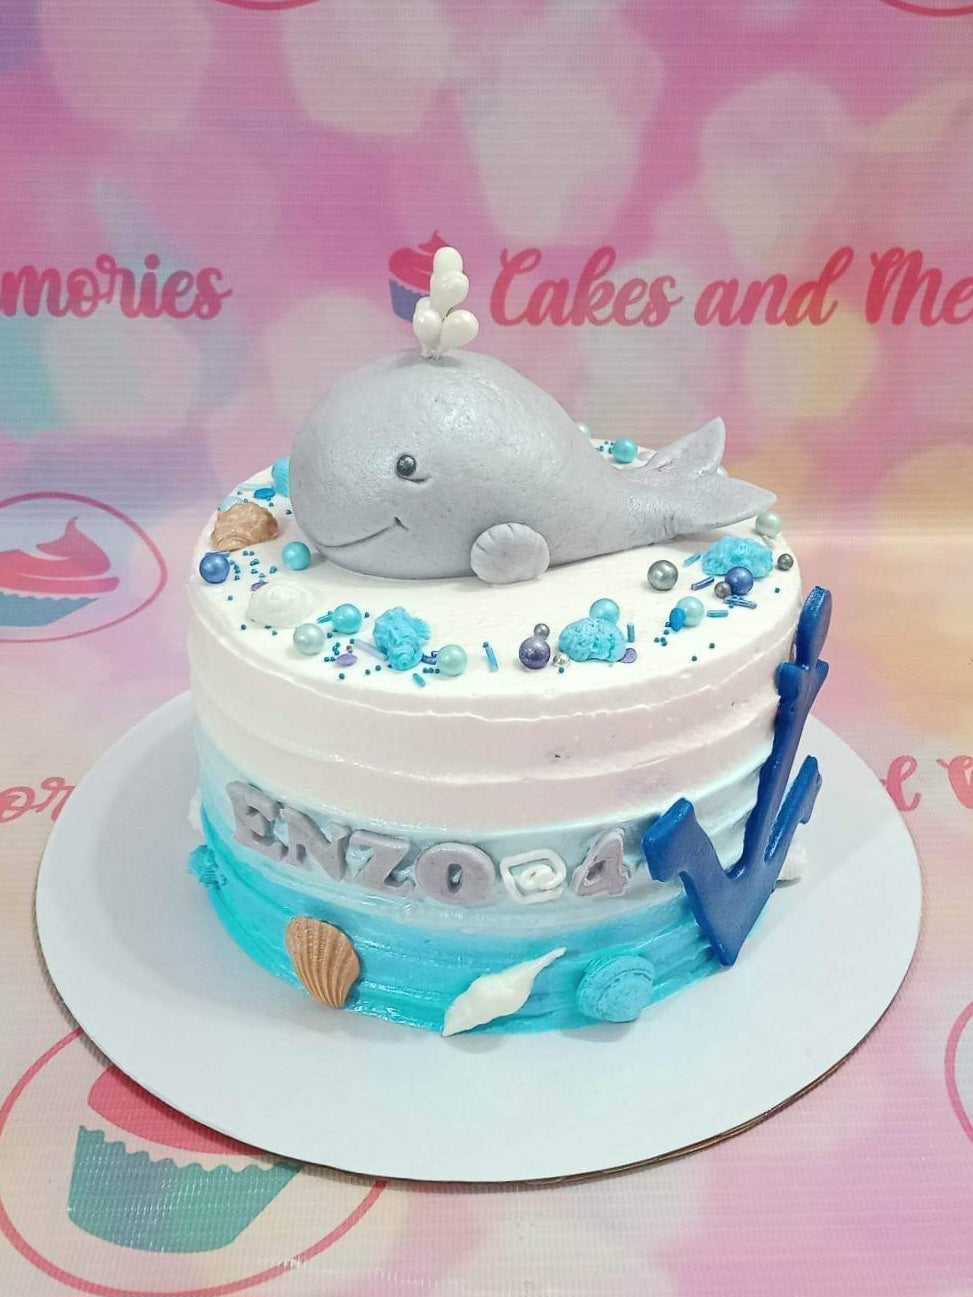 Dolphins on waves topper 🐬 Unique dolphin cake topper decorative exhibit  with 100% RKT - YouTube